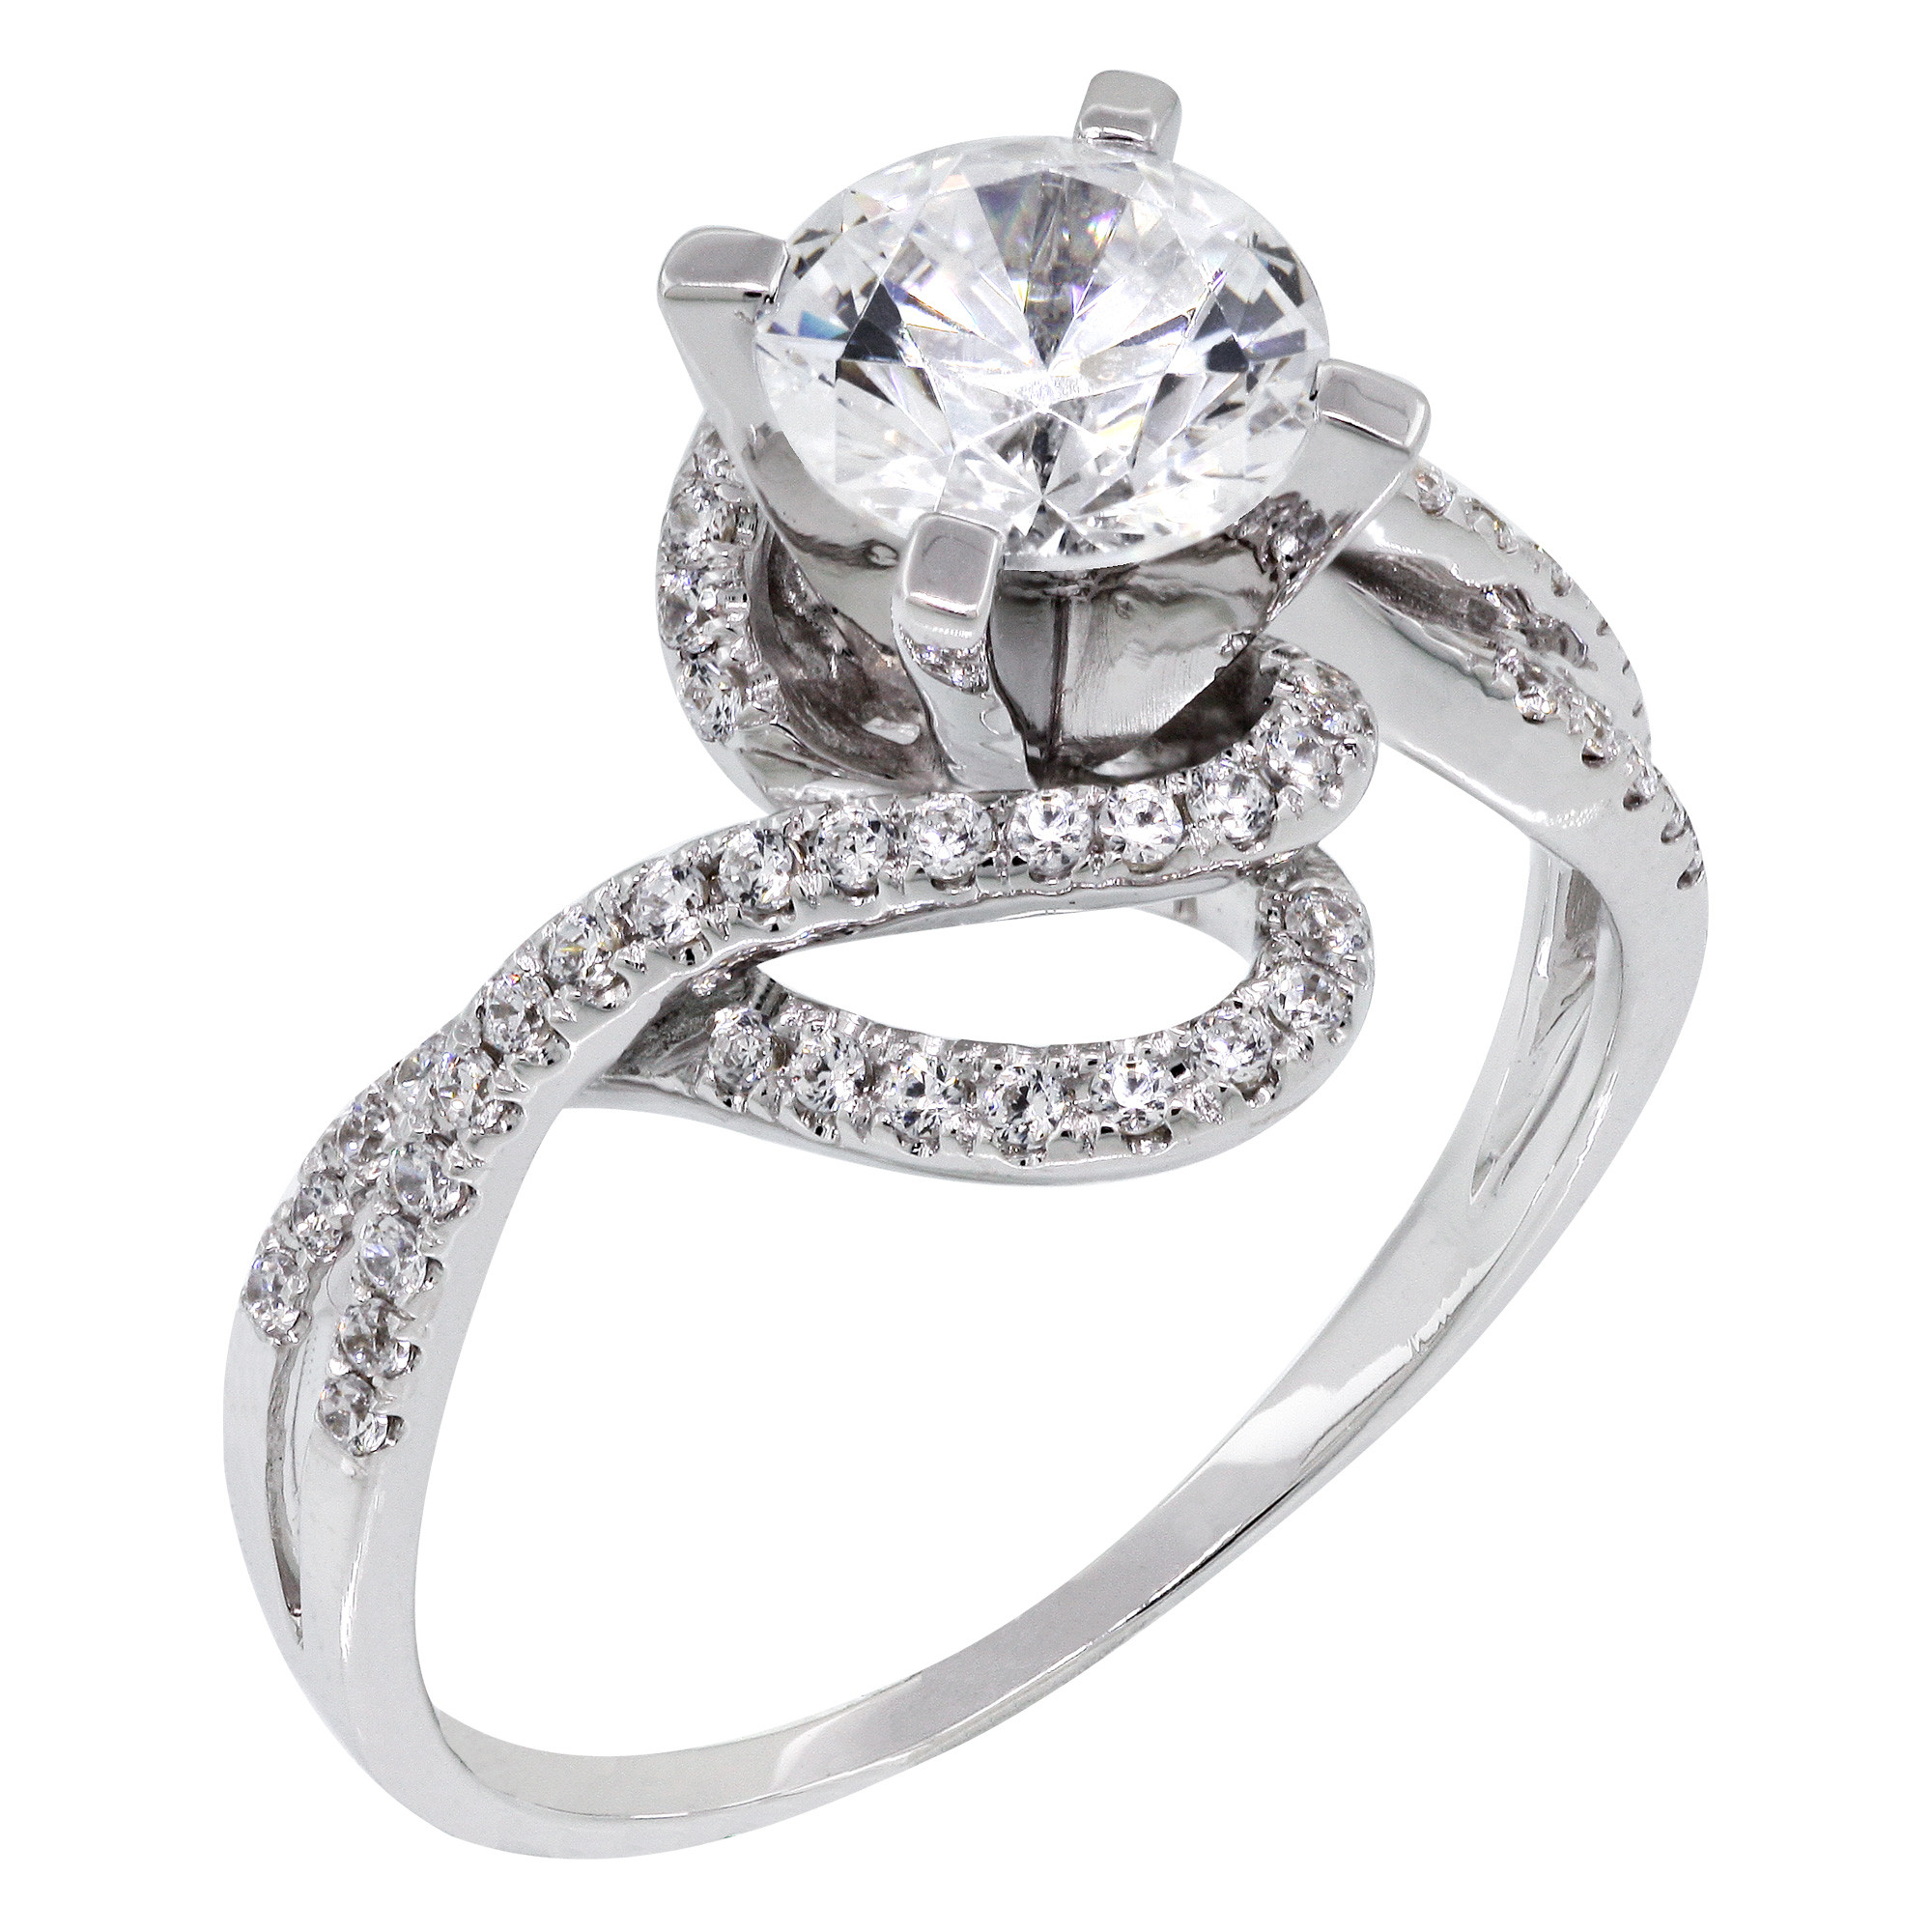 Pictures Of Diamond Engagement Rings
 Diamond Nexus Introduces New Engagement Ring Collection